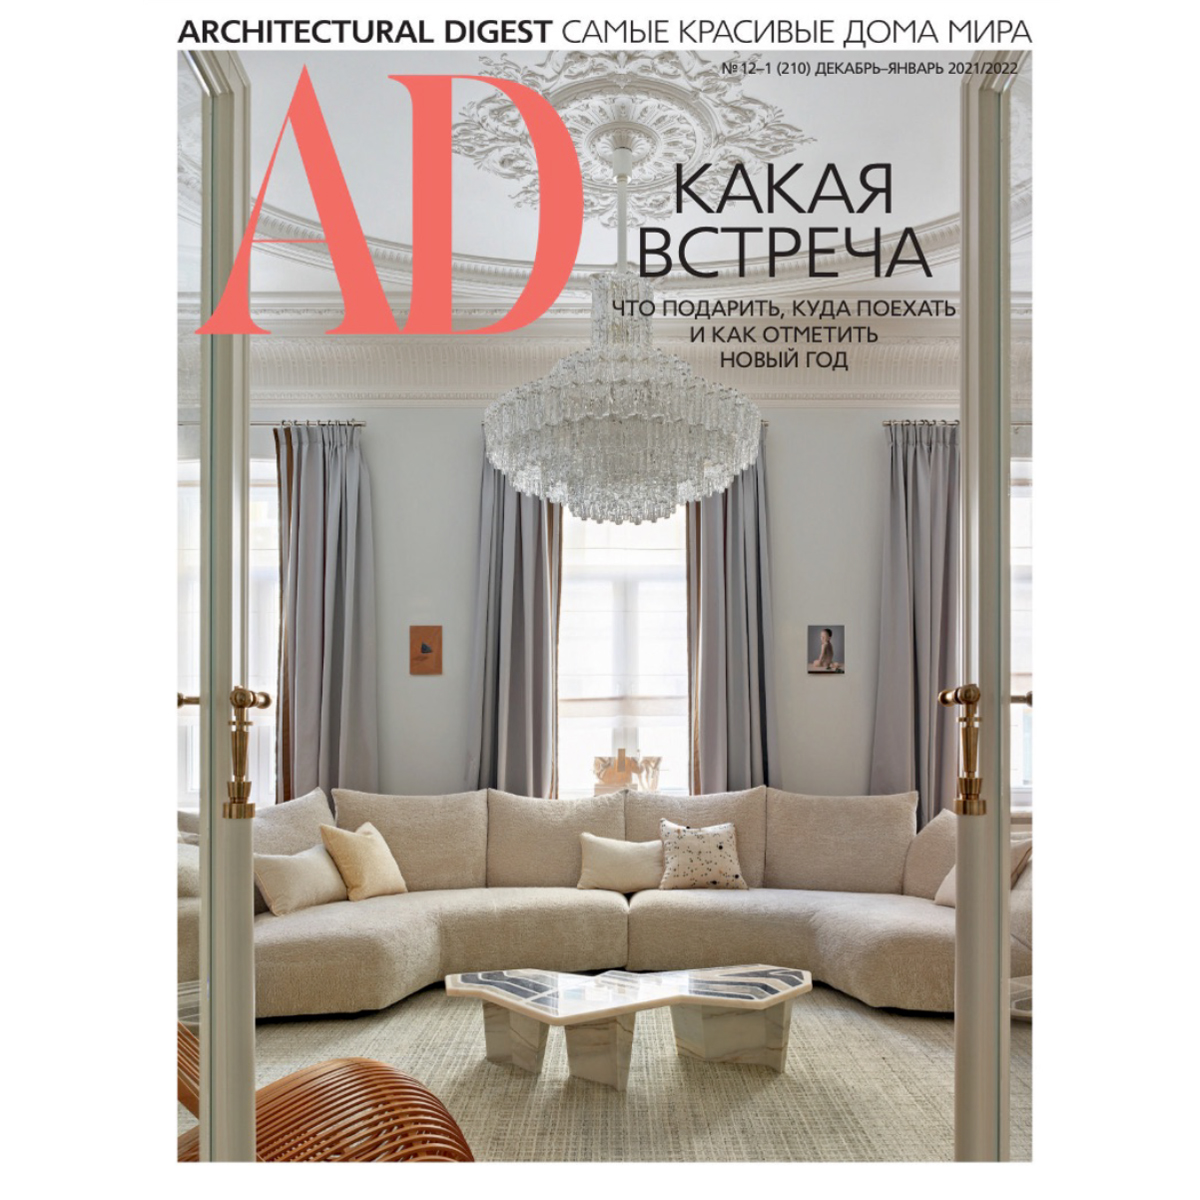 AD-Russia-December-2021-Hommes-Studio-Project-1